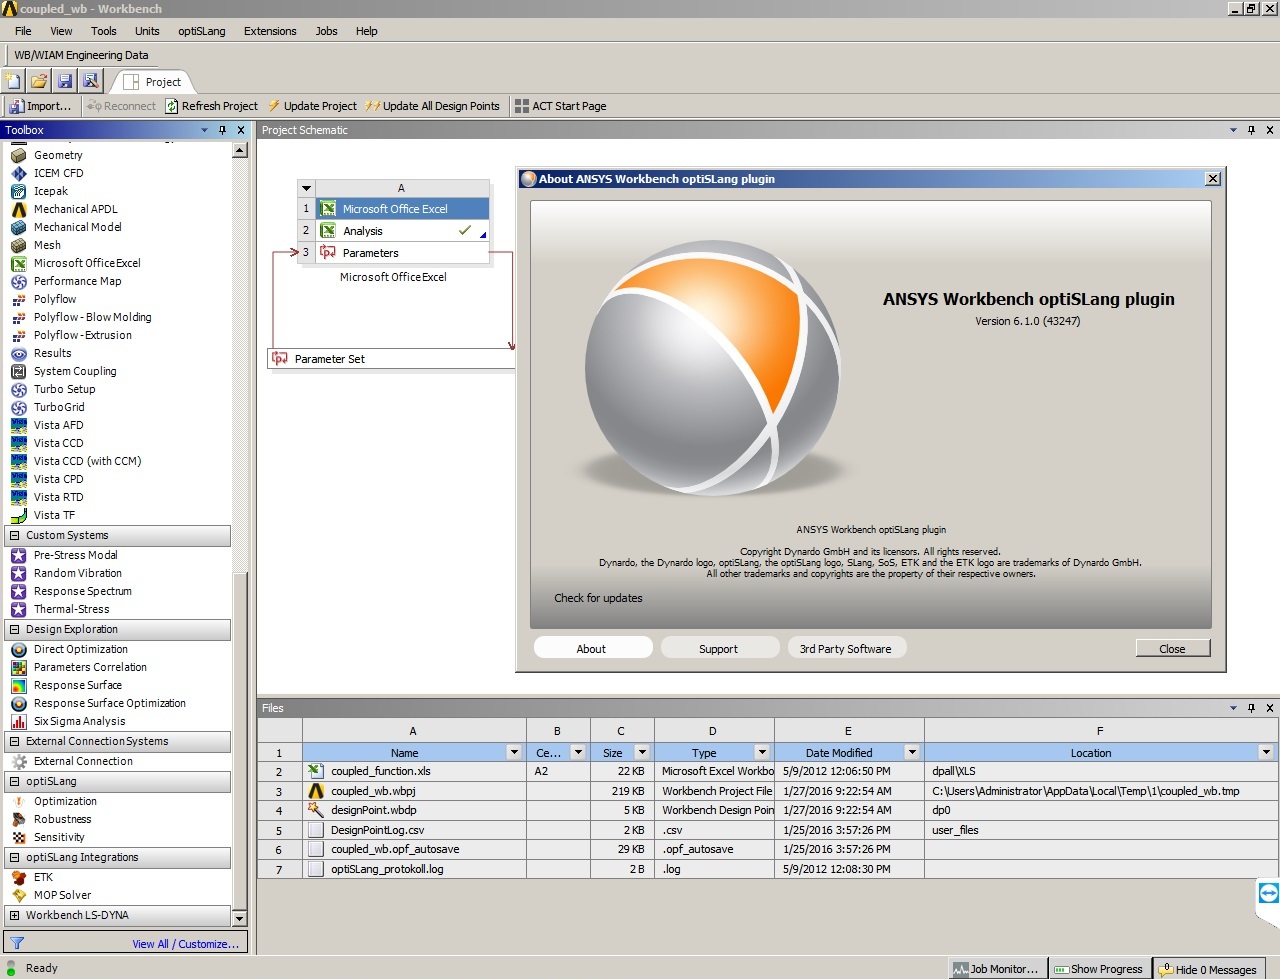 Working with ANSYS Workbench optiSLang 6.1.0.43247